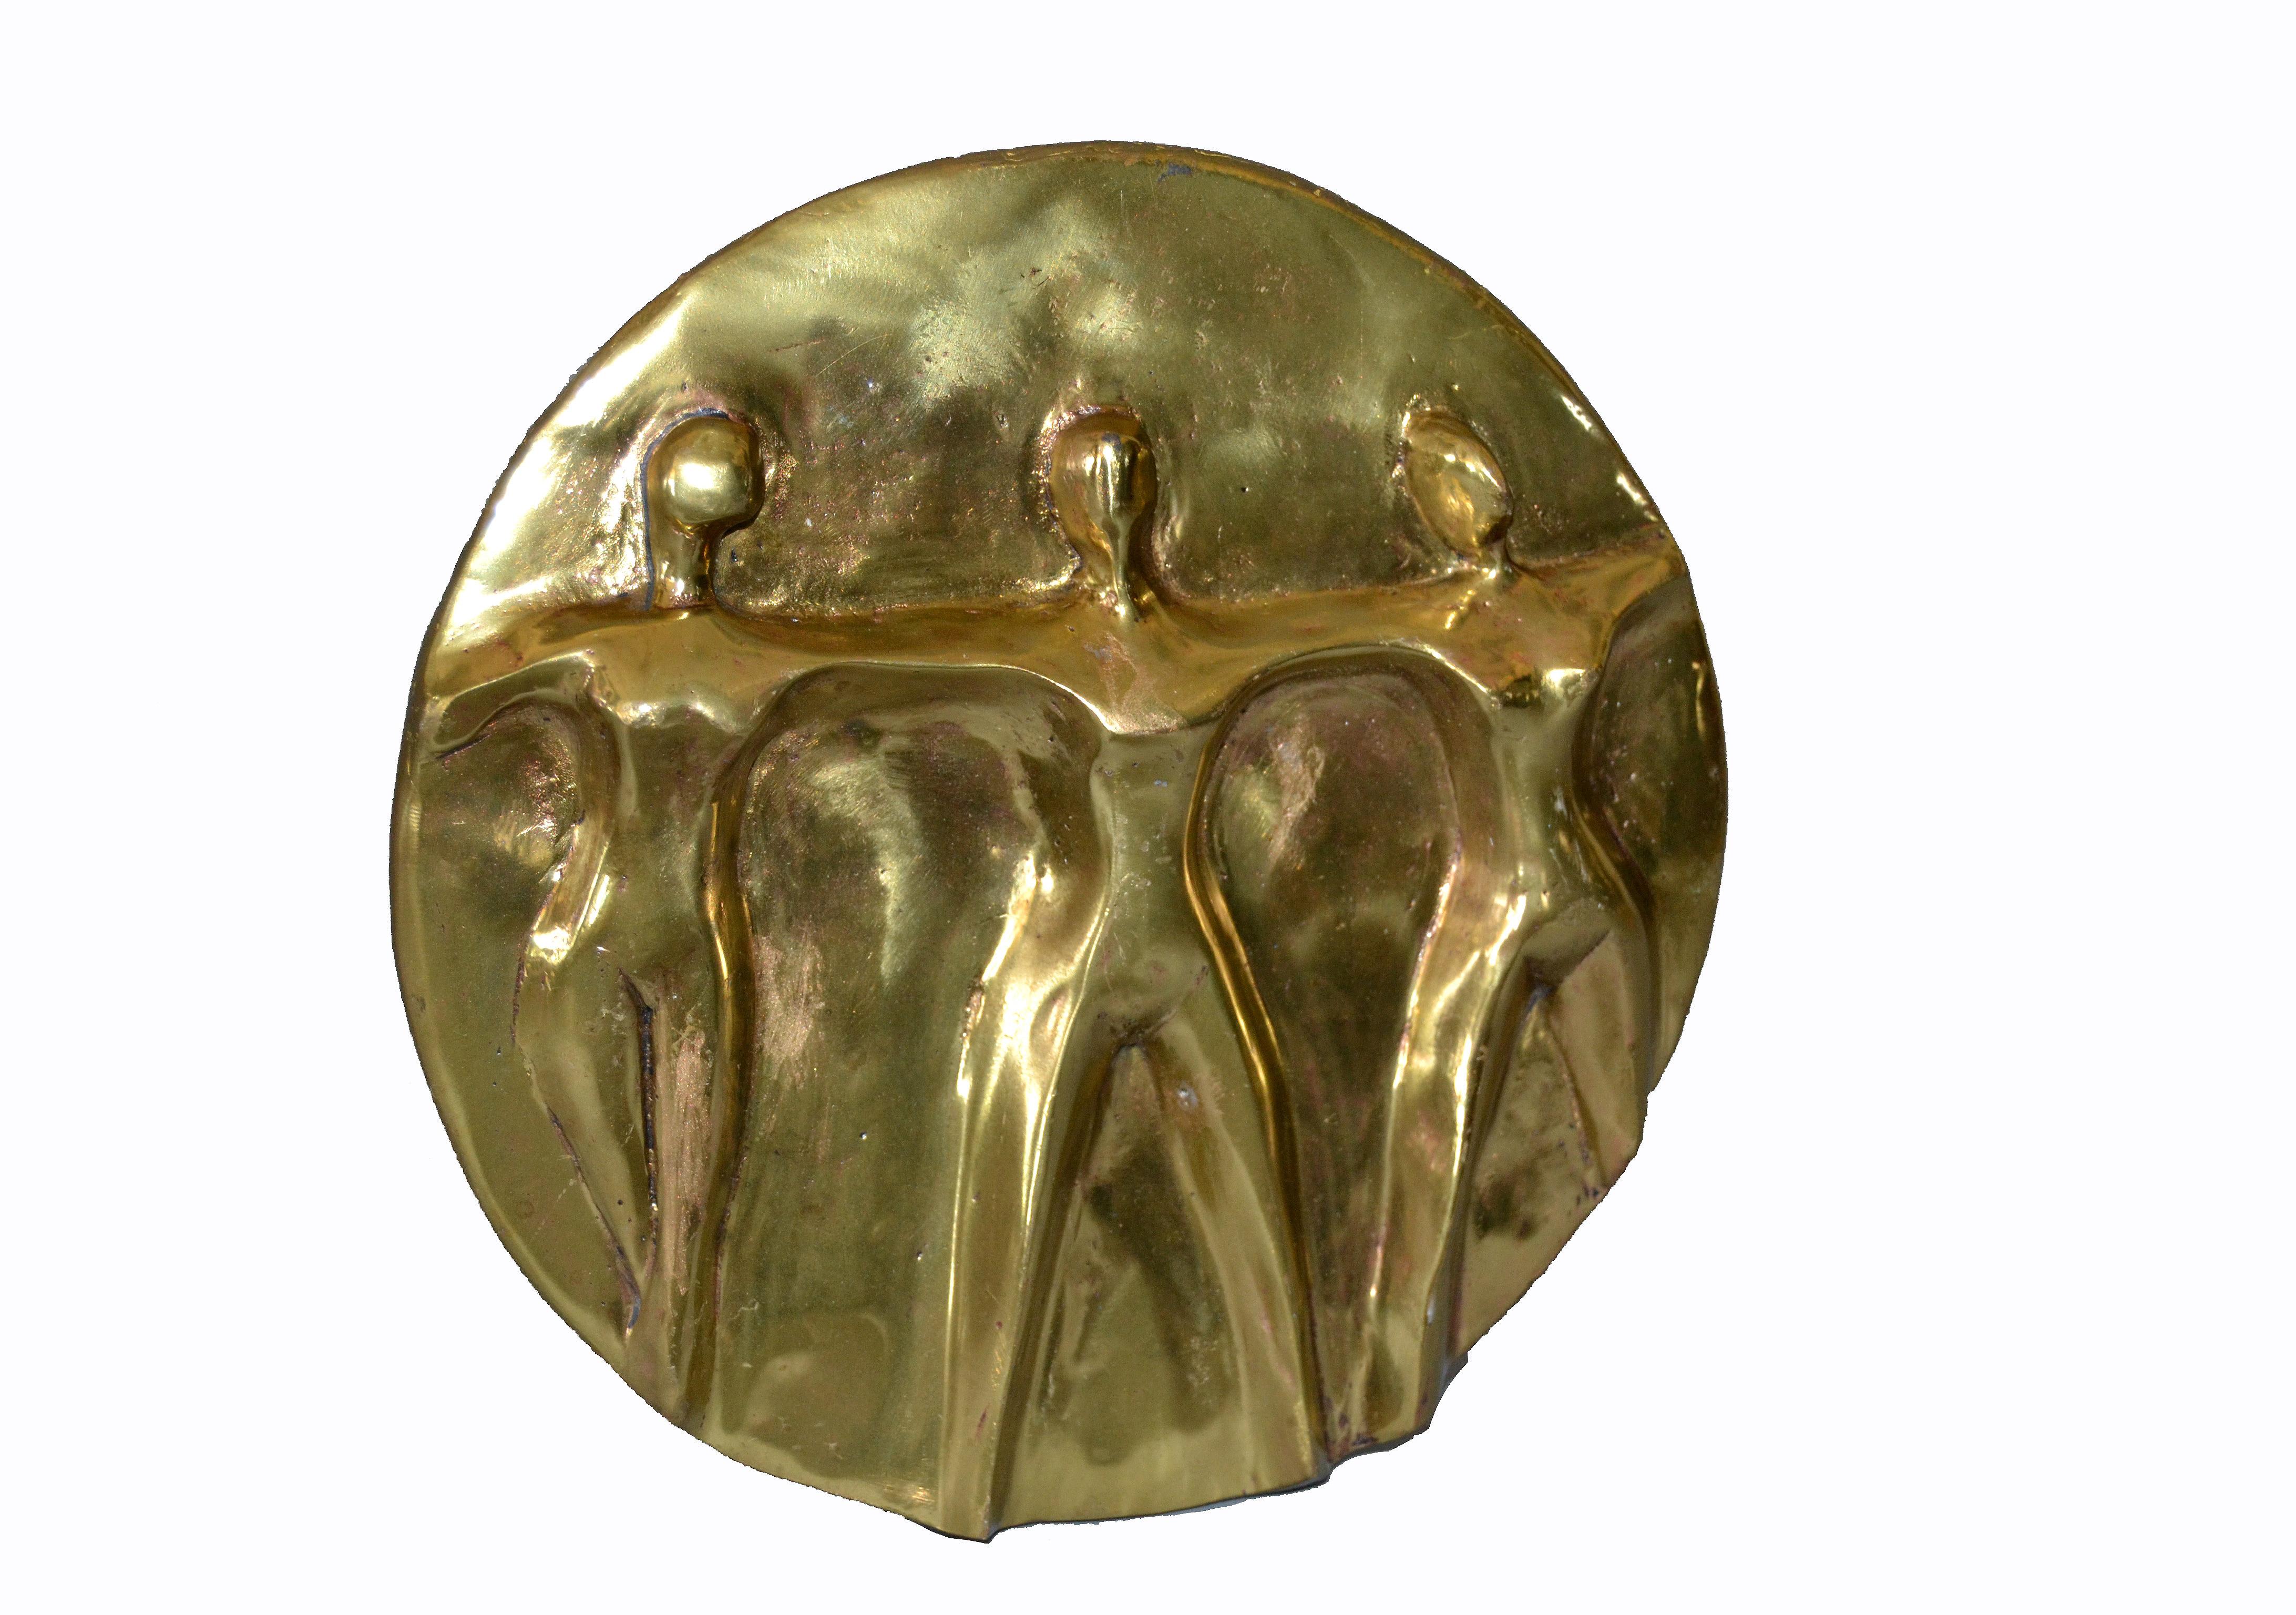 Mid-Century Modern solid bronze handcrafted table Art, sculpture showing 'Woman United'.
Very popular decorative table sculpture or a desk centerpiece.